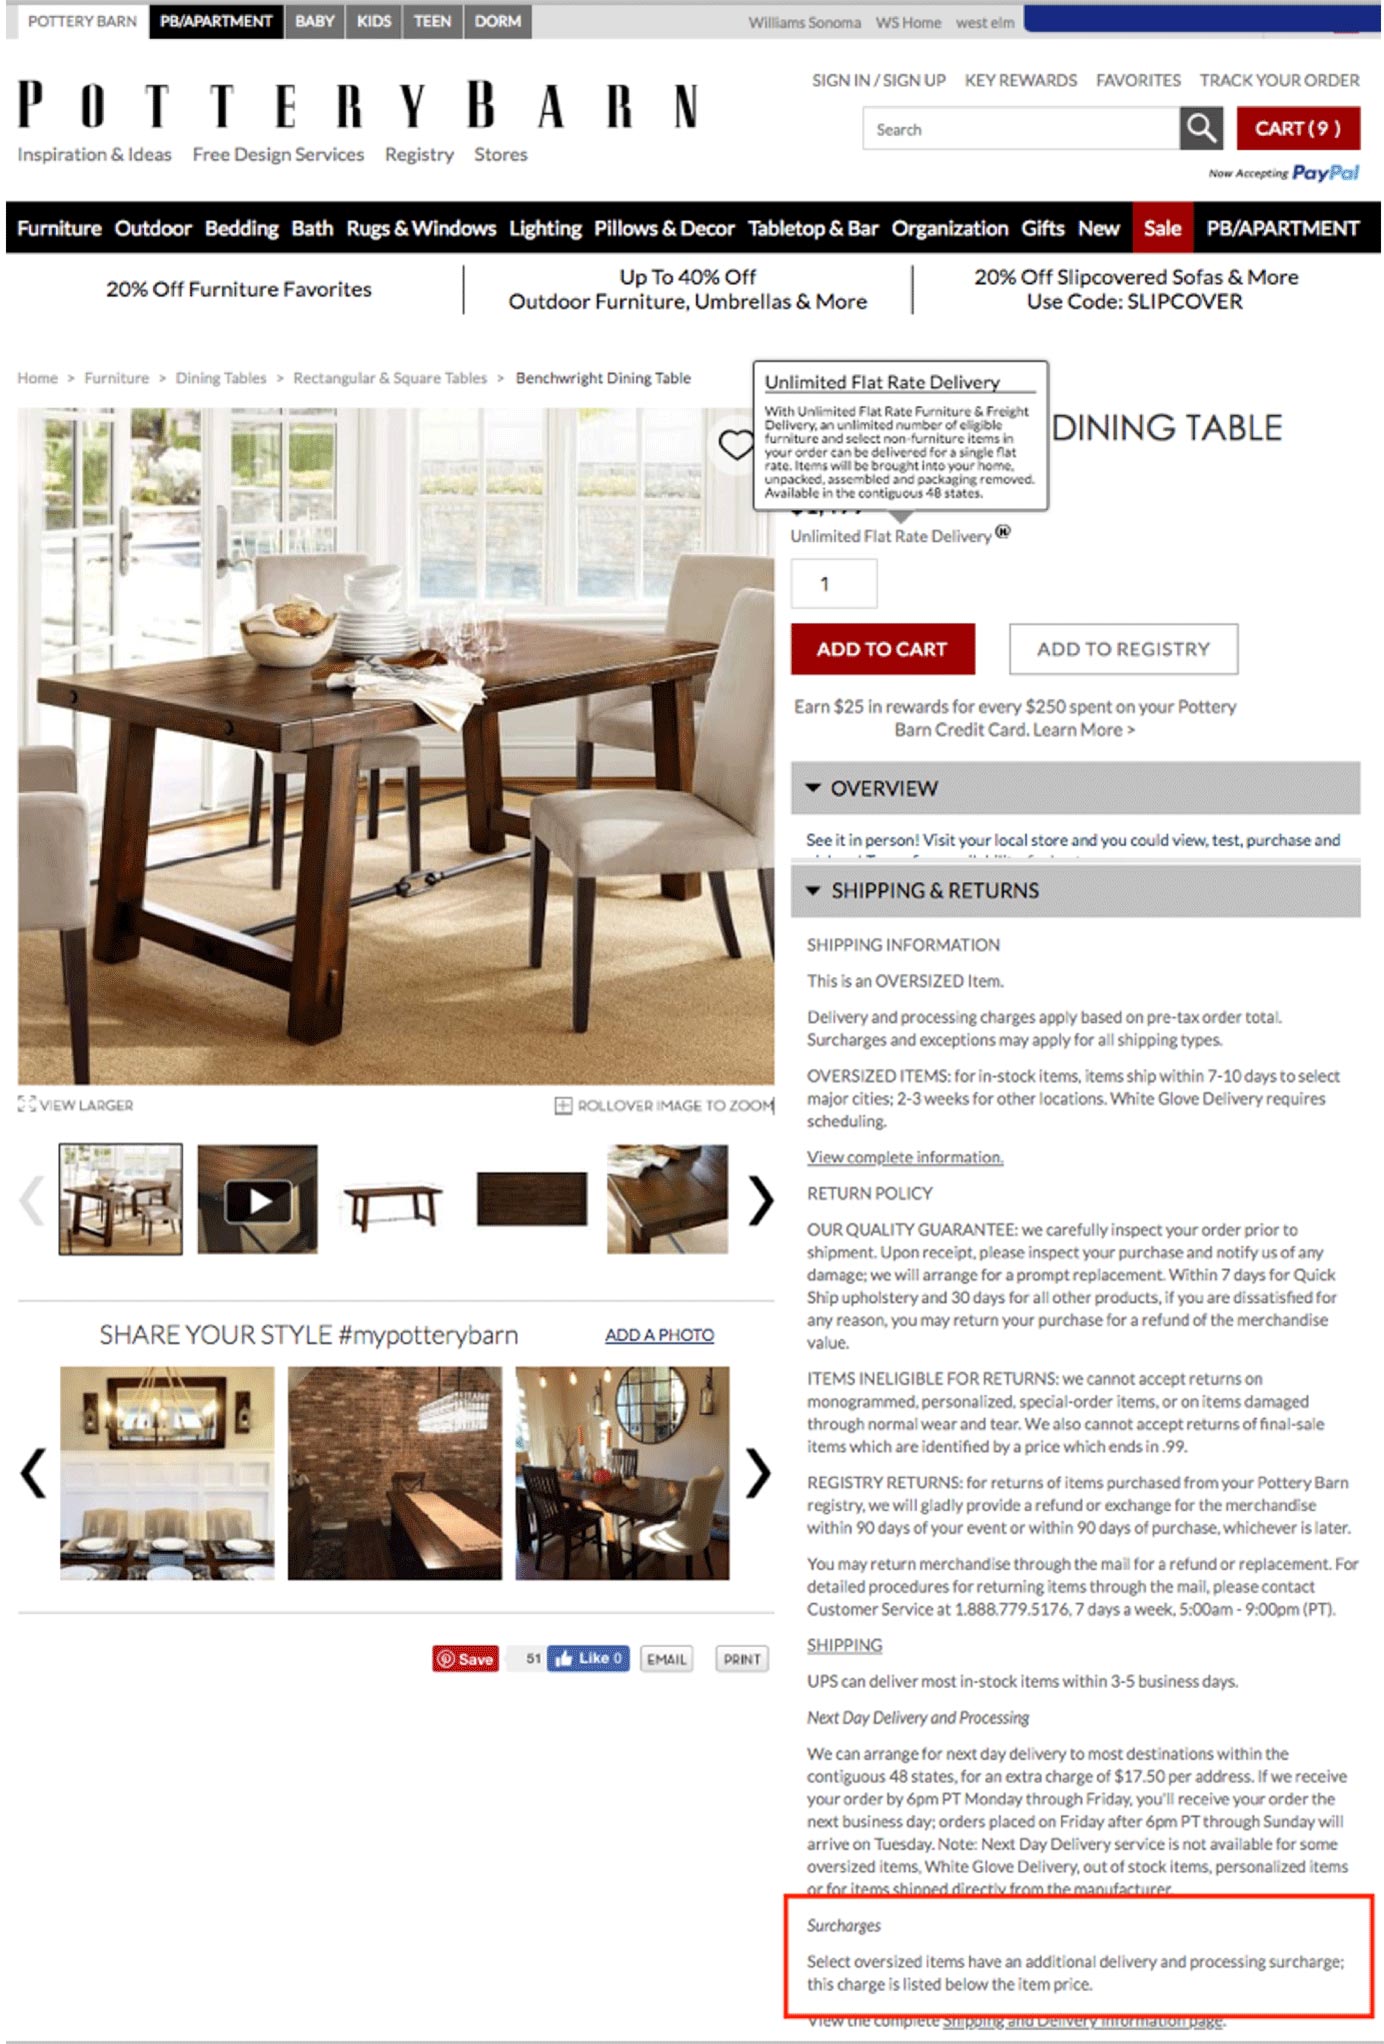 Pottery Barn Product Page Surcharge